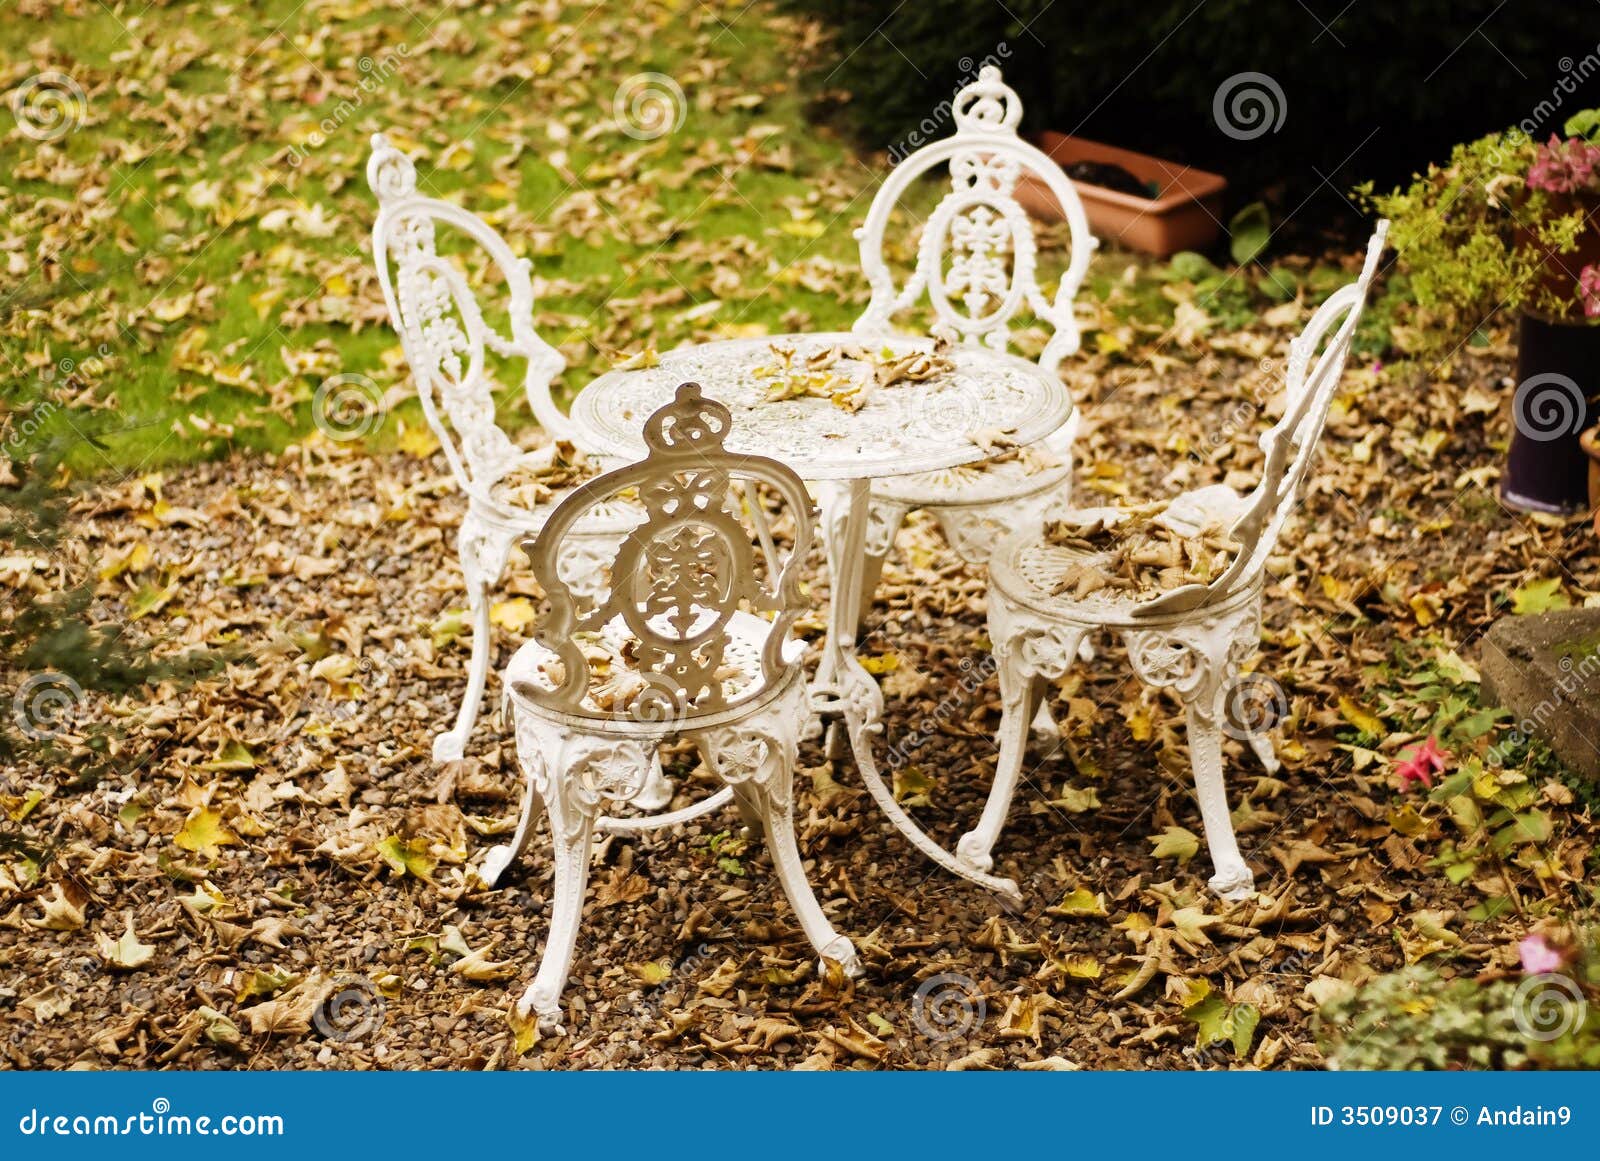 Garden Table And Chairs Stock Image Image Of Garden Leaves 3509037